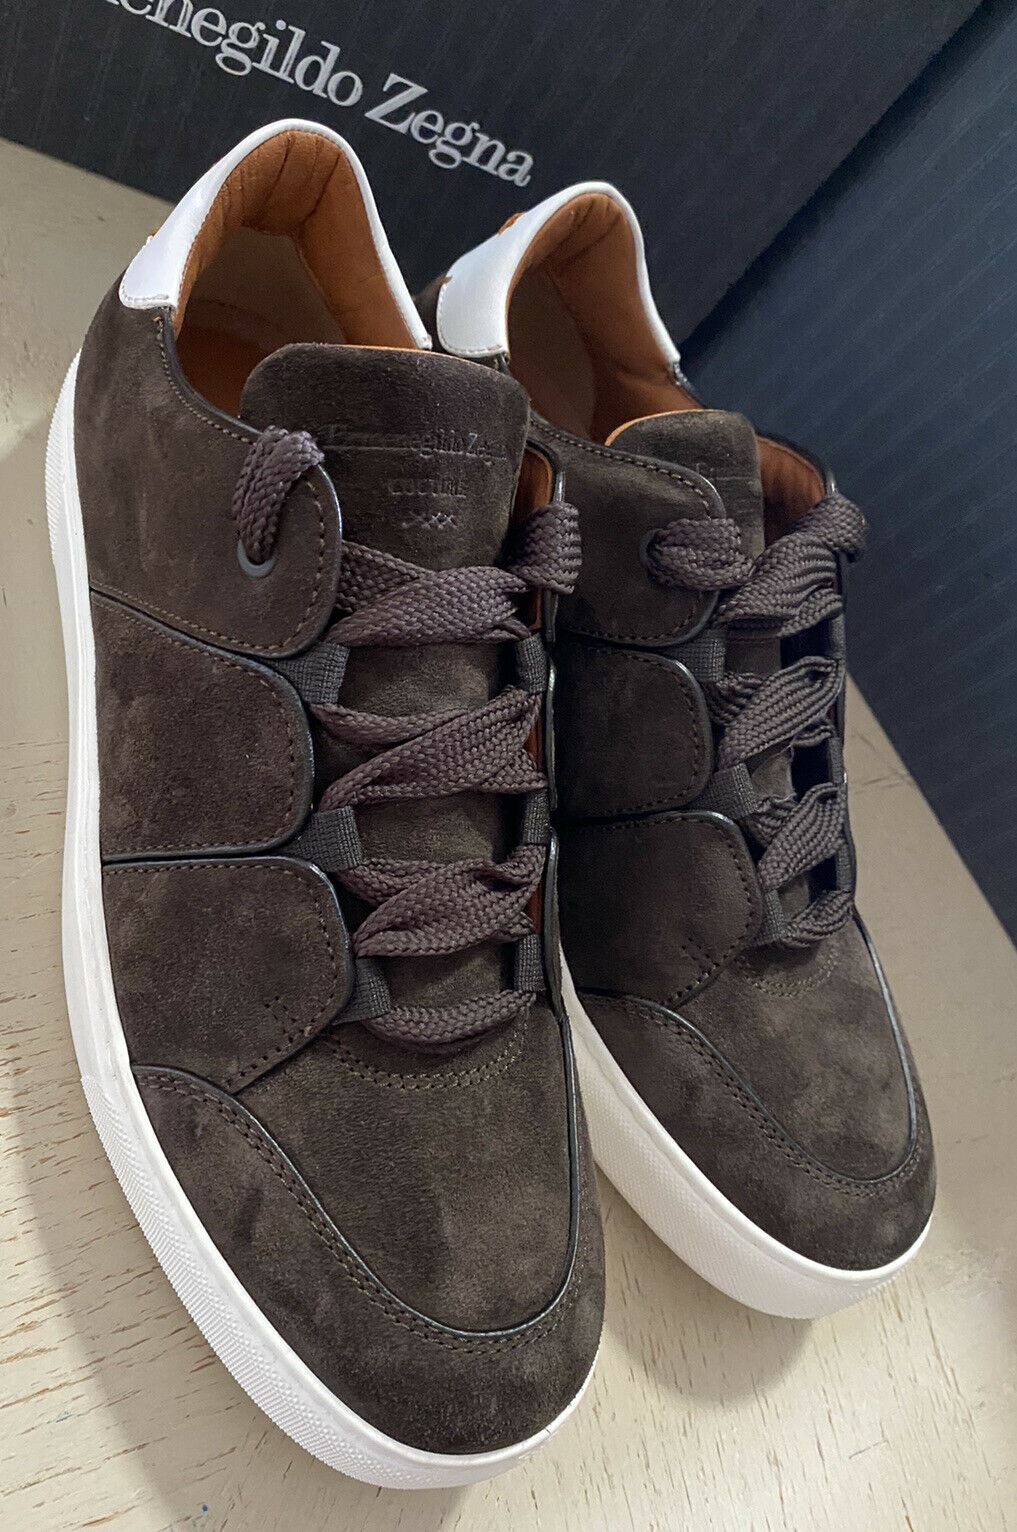 New $850 Ermenegildo Zegna Couture Suede/Leather Sneakers Shoes Dark Brown 10 US